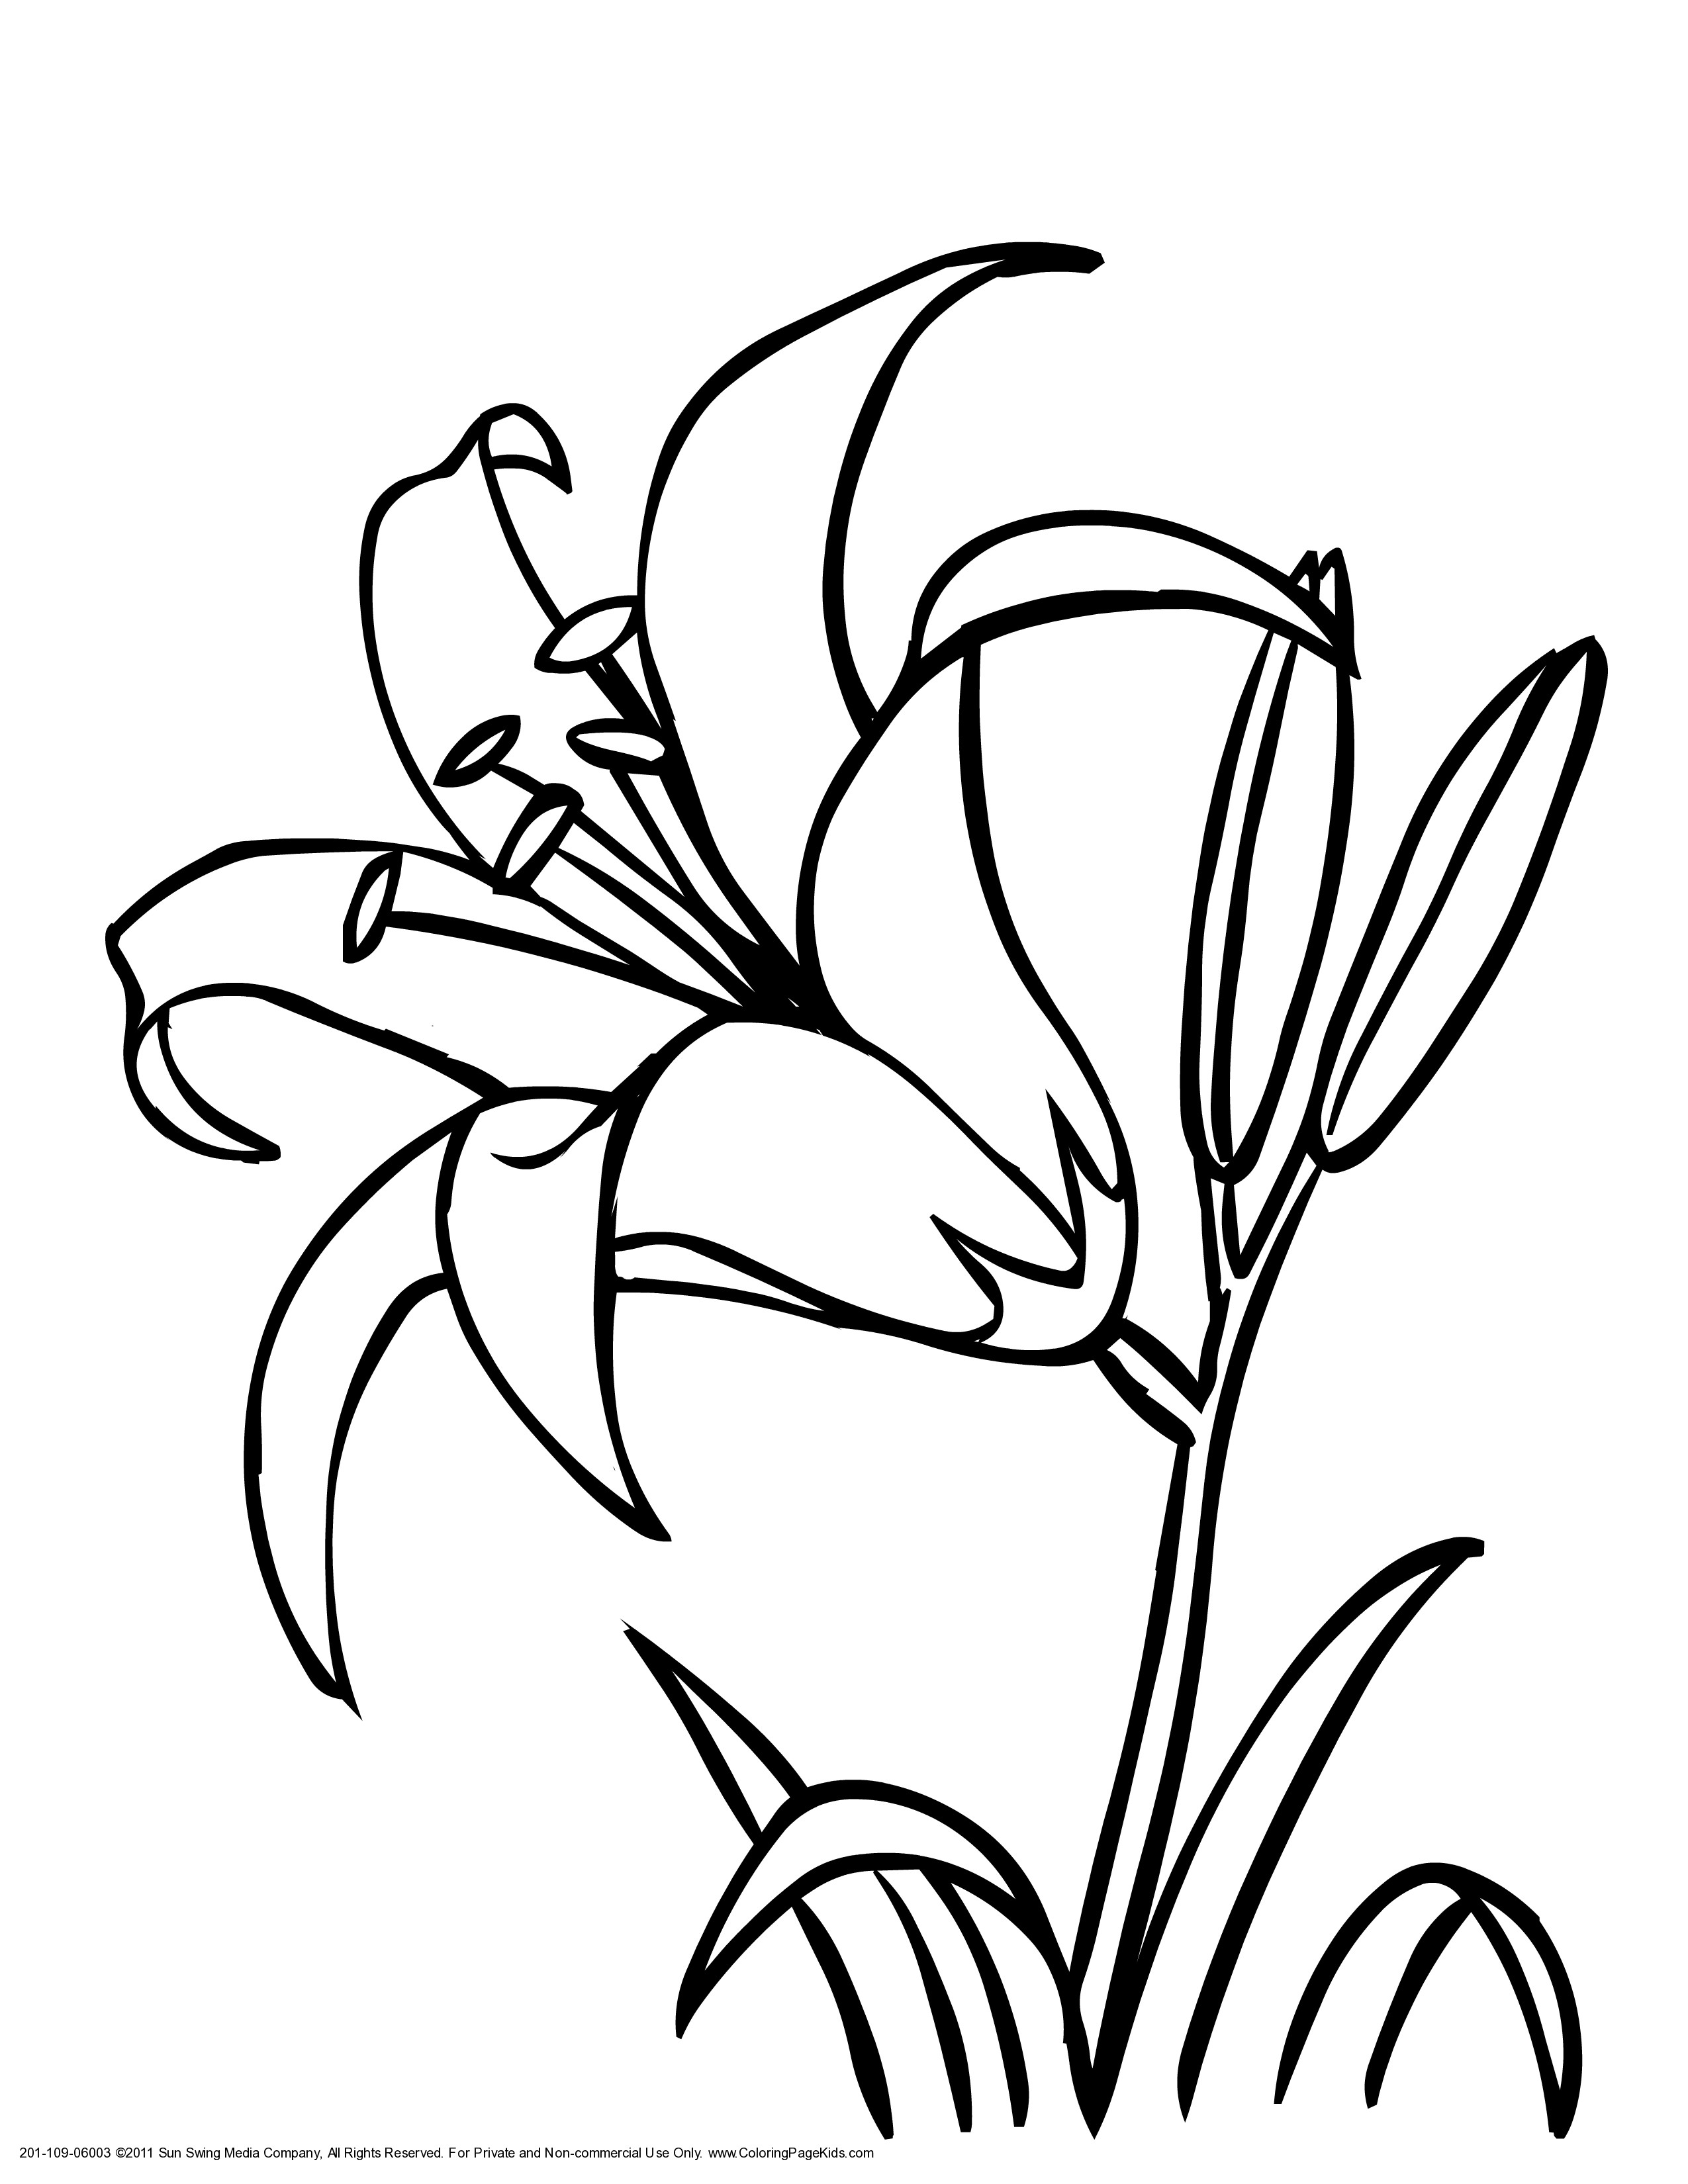 Coloring Lily Flower Coloring Pages Printable Of Lily ...